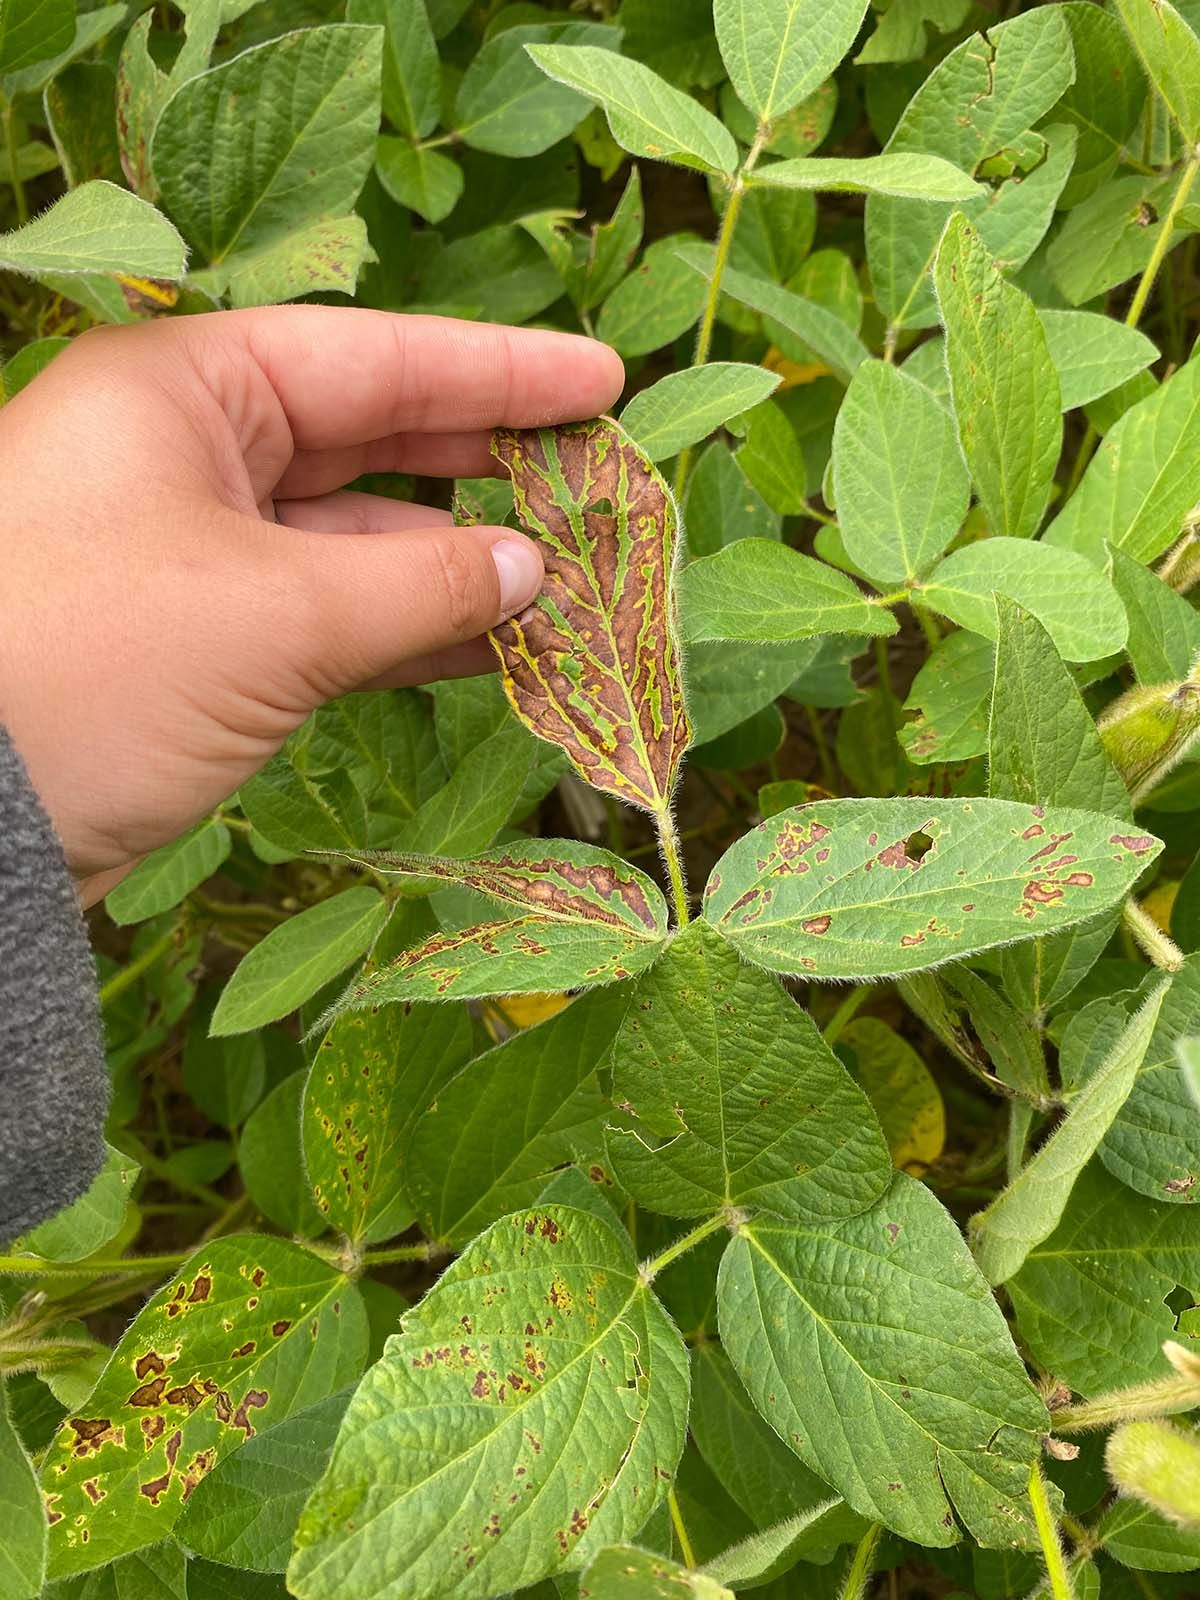 SDS IDENTIFICATION IN SOYBEANS